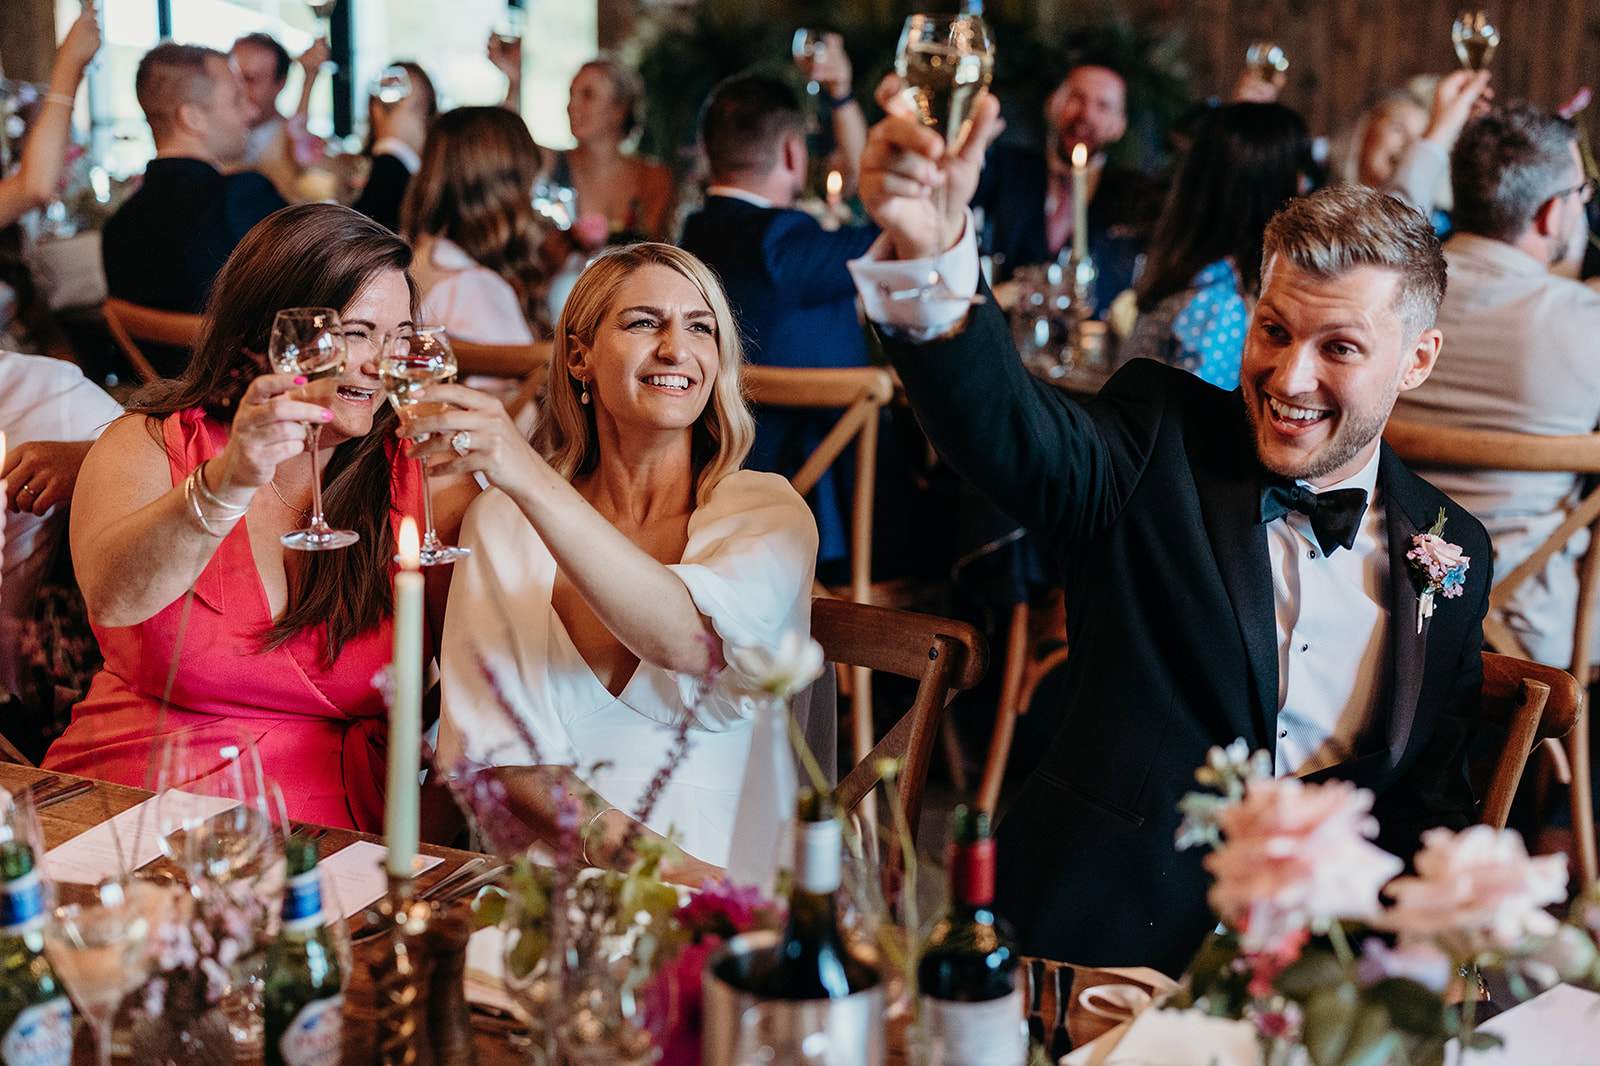 Guests raising their glasses for a toast to the happy couple at their farm wedding.
